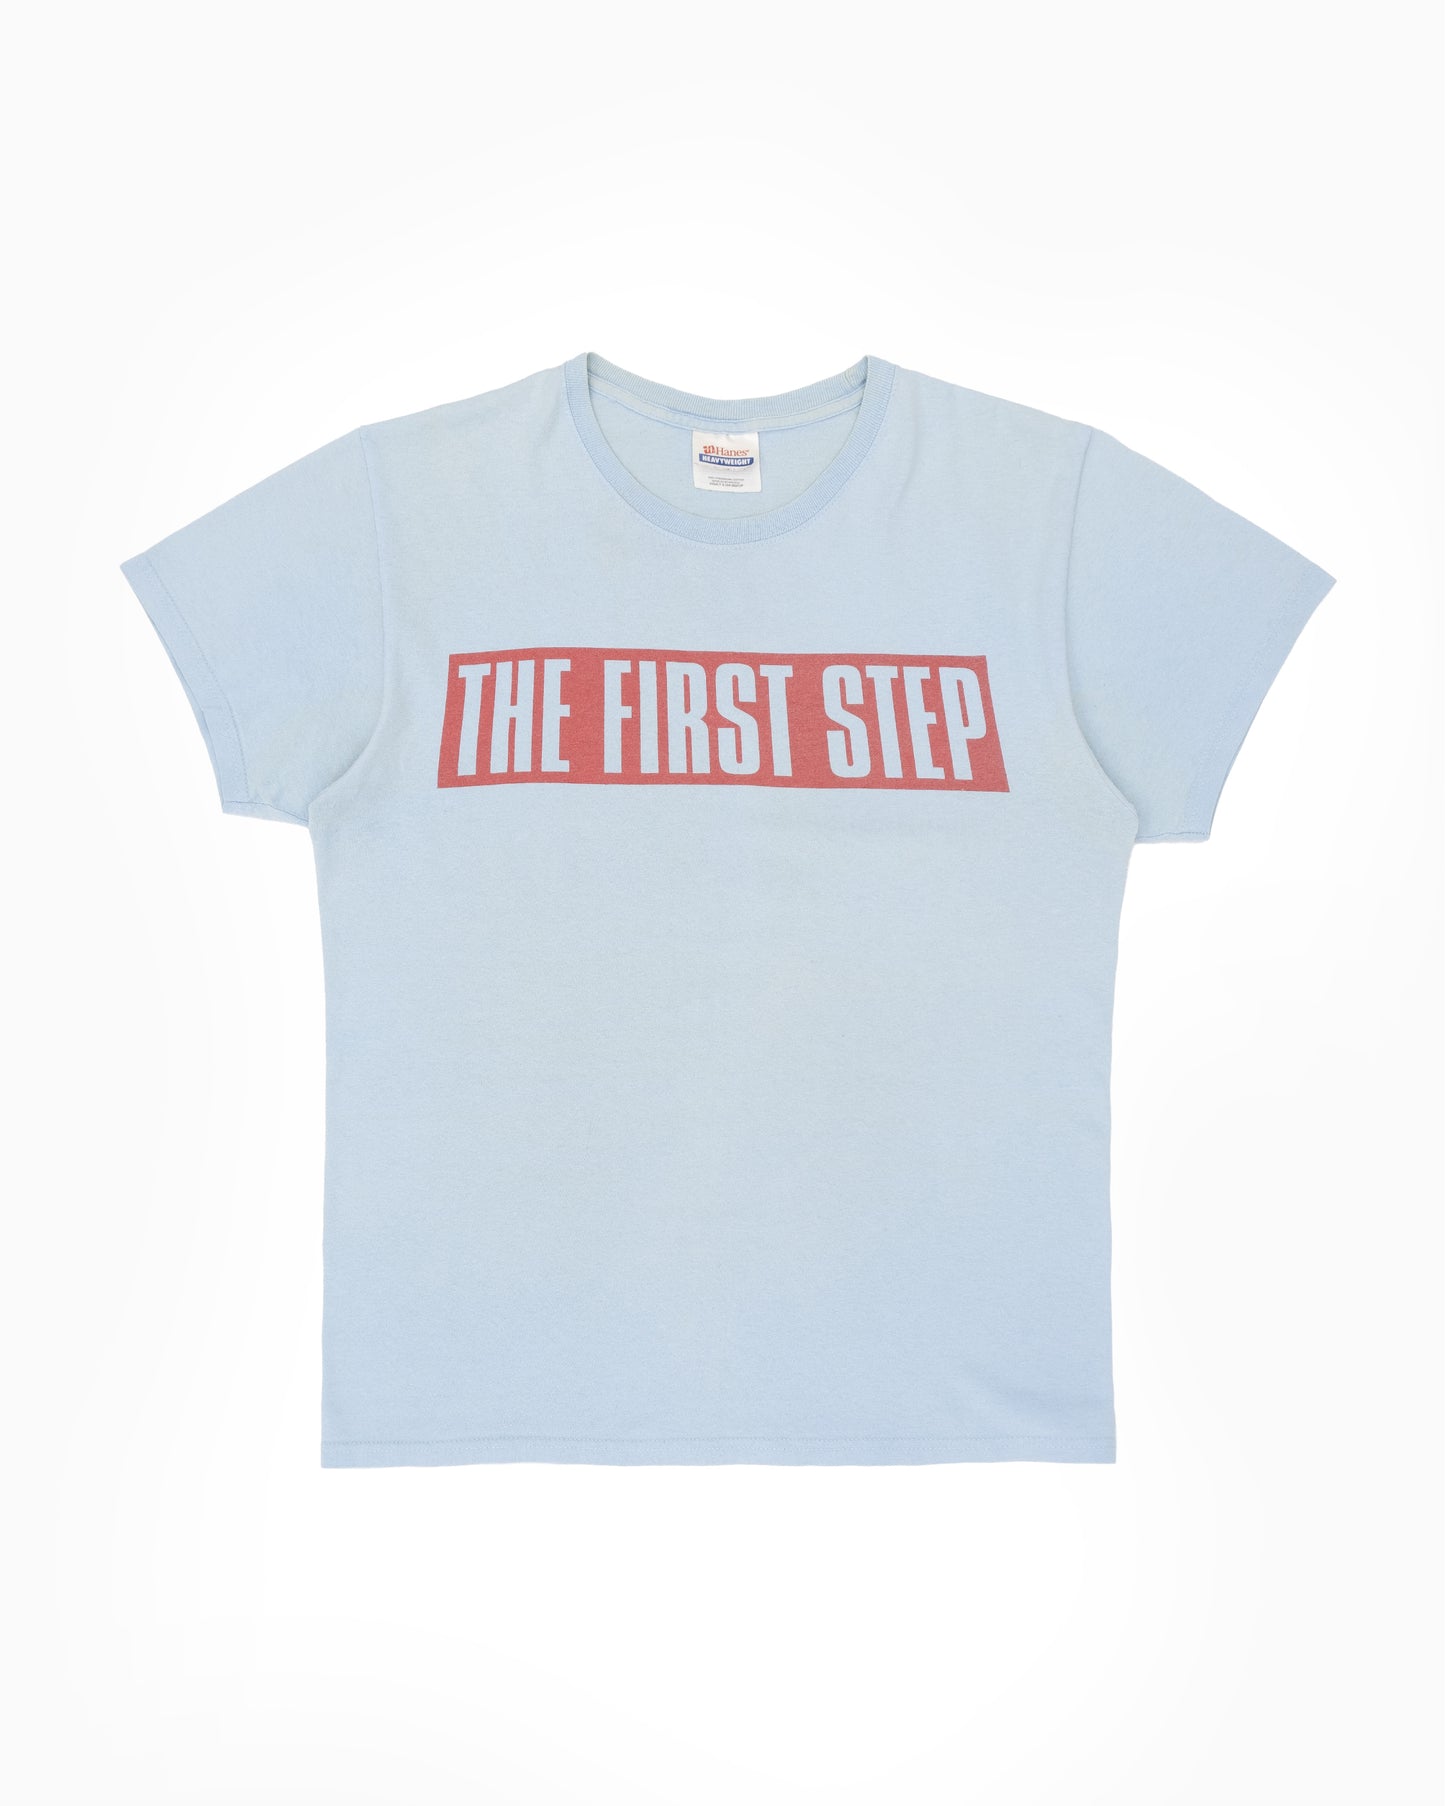 2007 The First Step "We Need A Greater Vision" T-Shirt